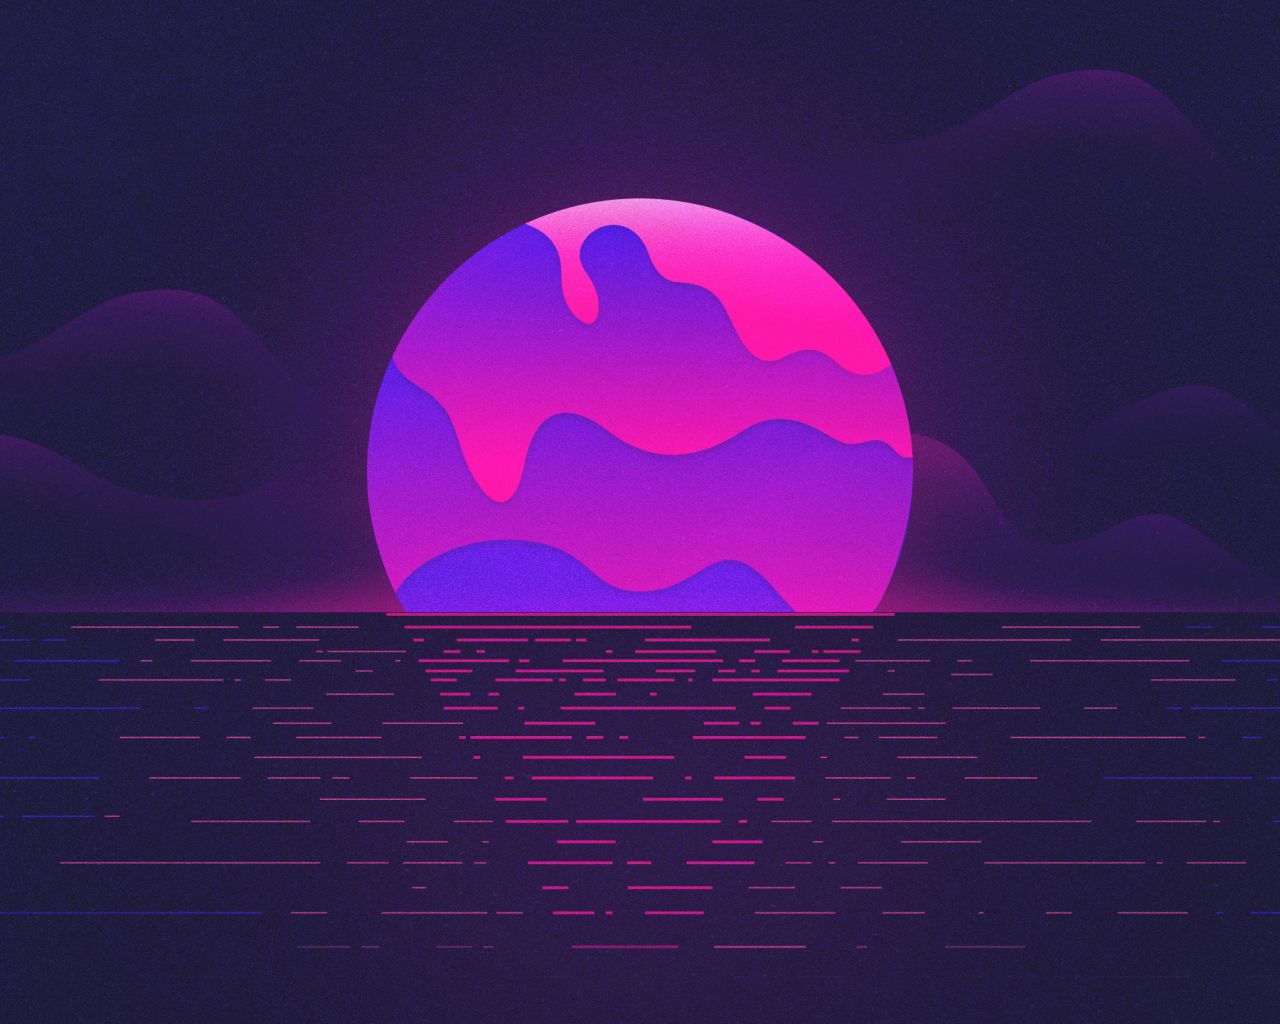 An illustration of a purple and pink sun setting over water - 1280x1024